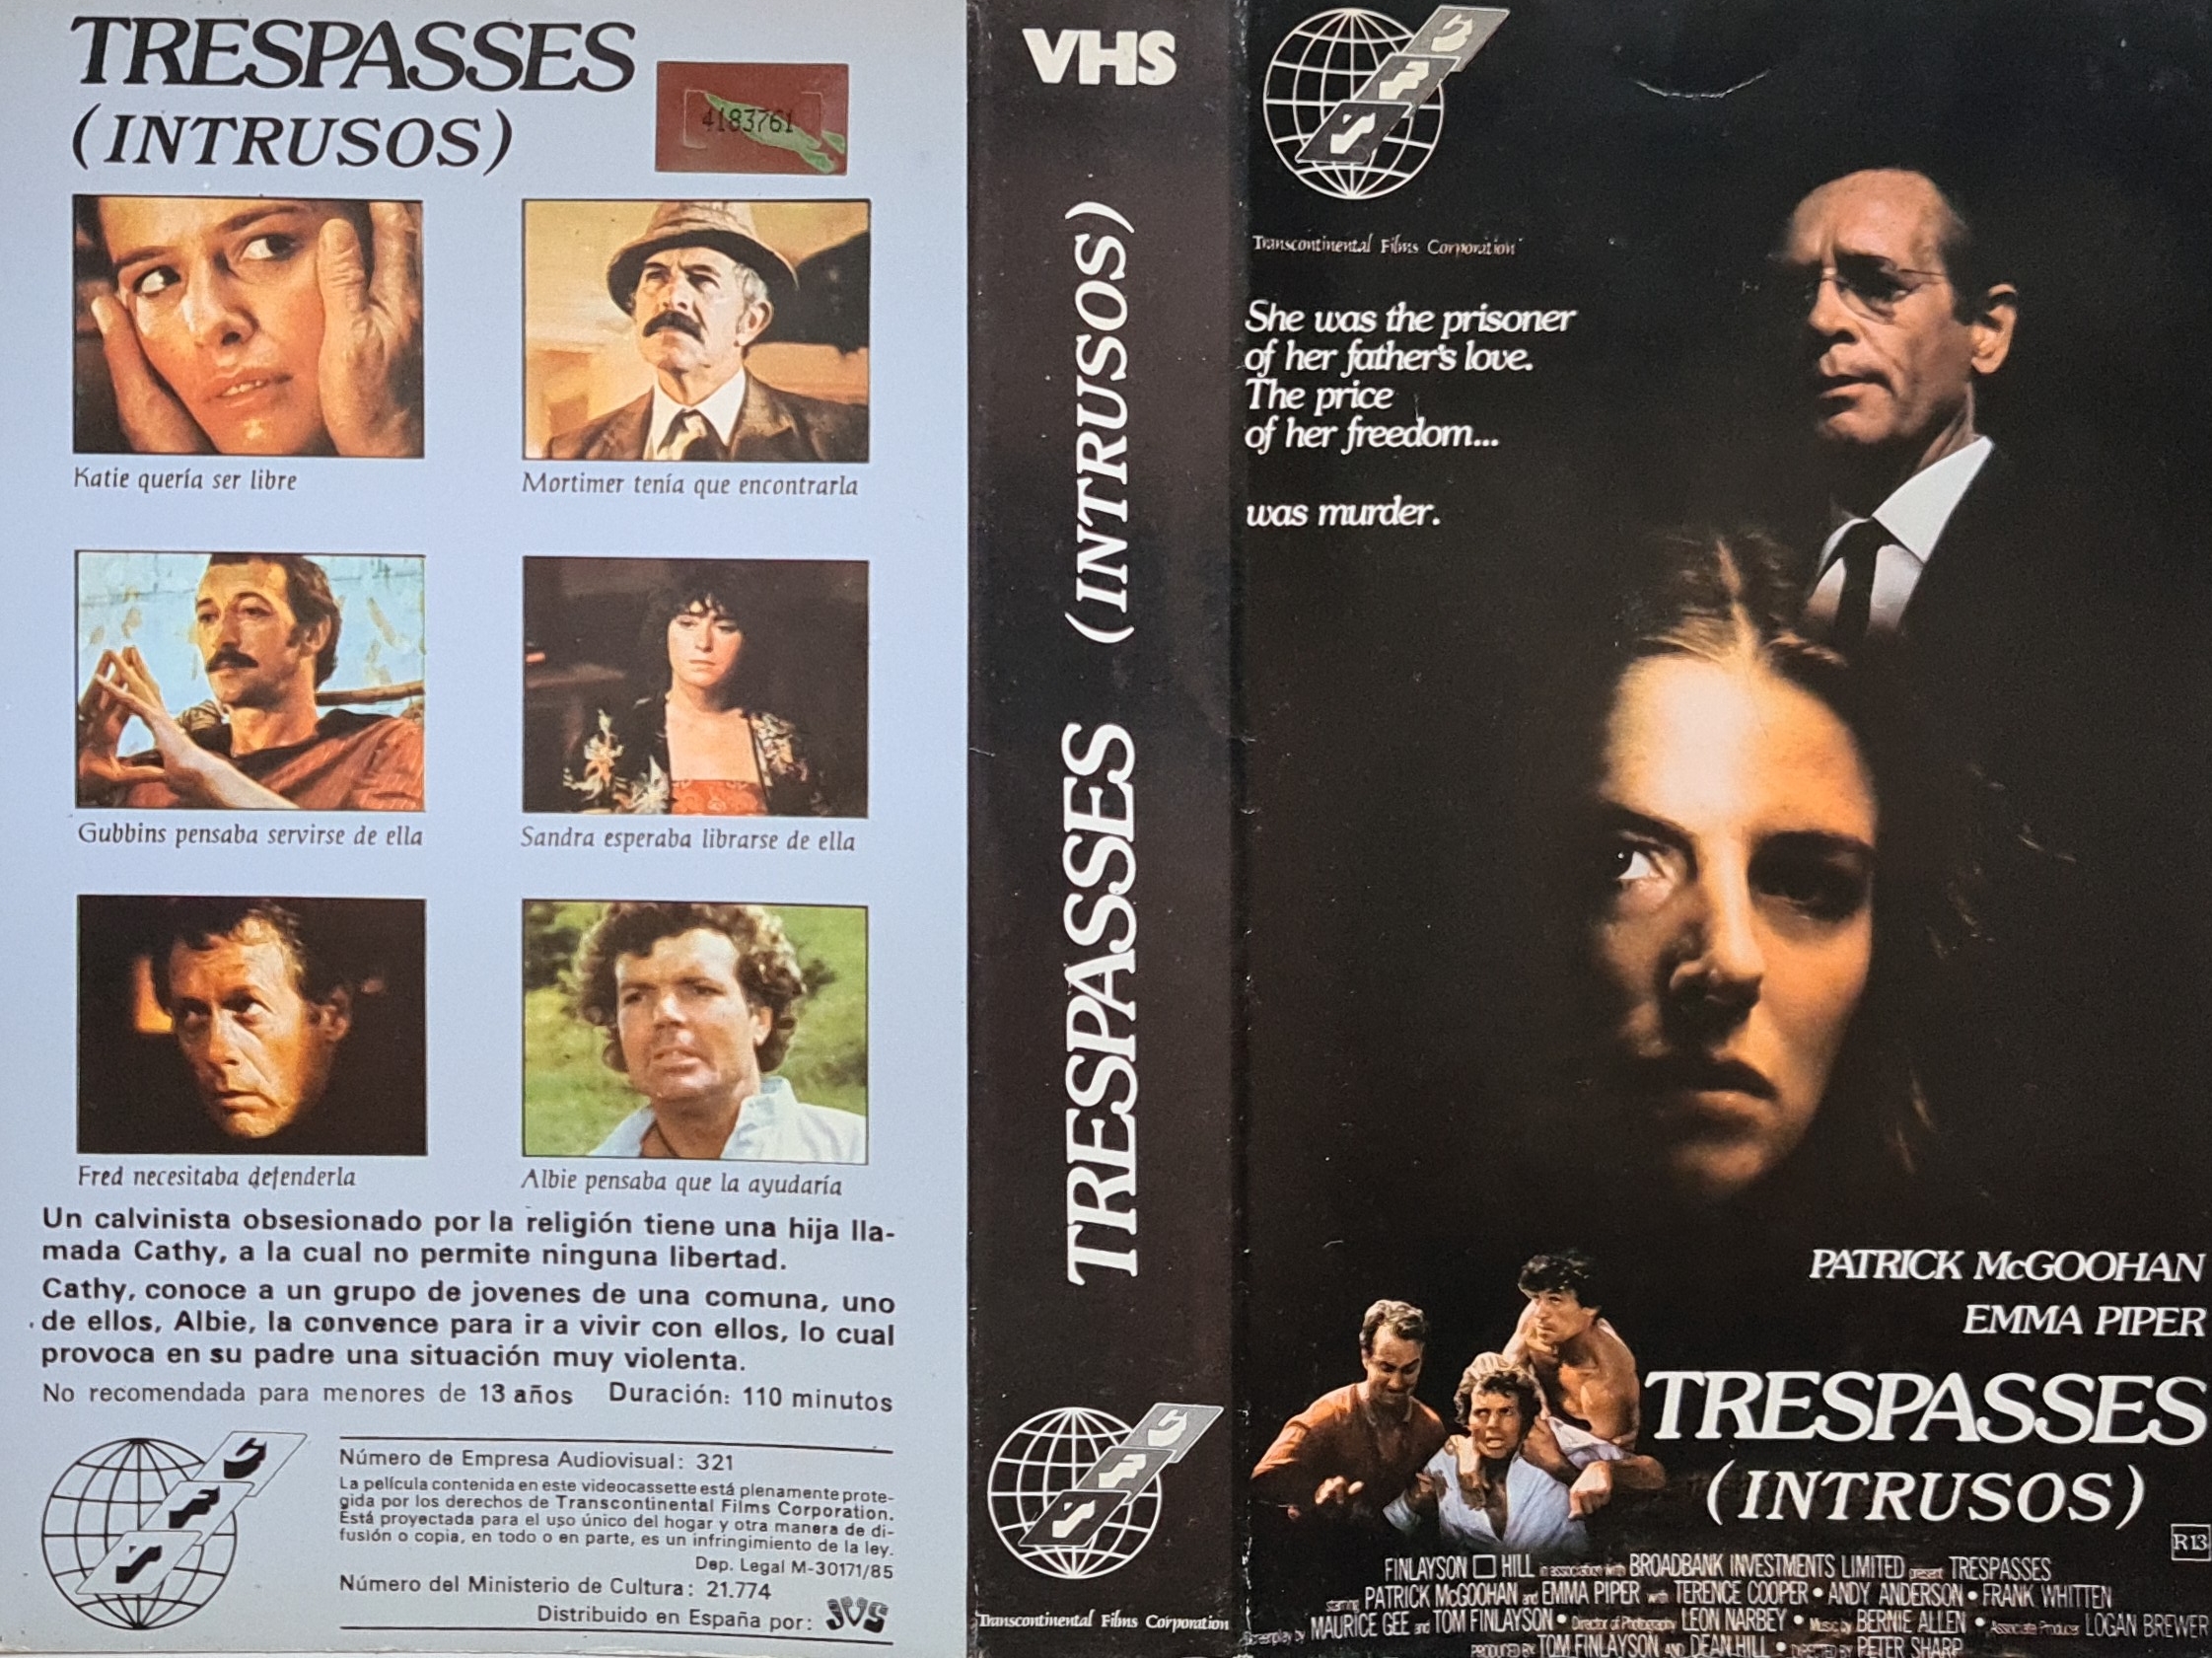 Spanish vhs release